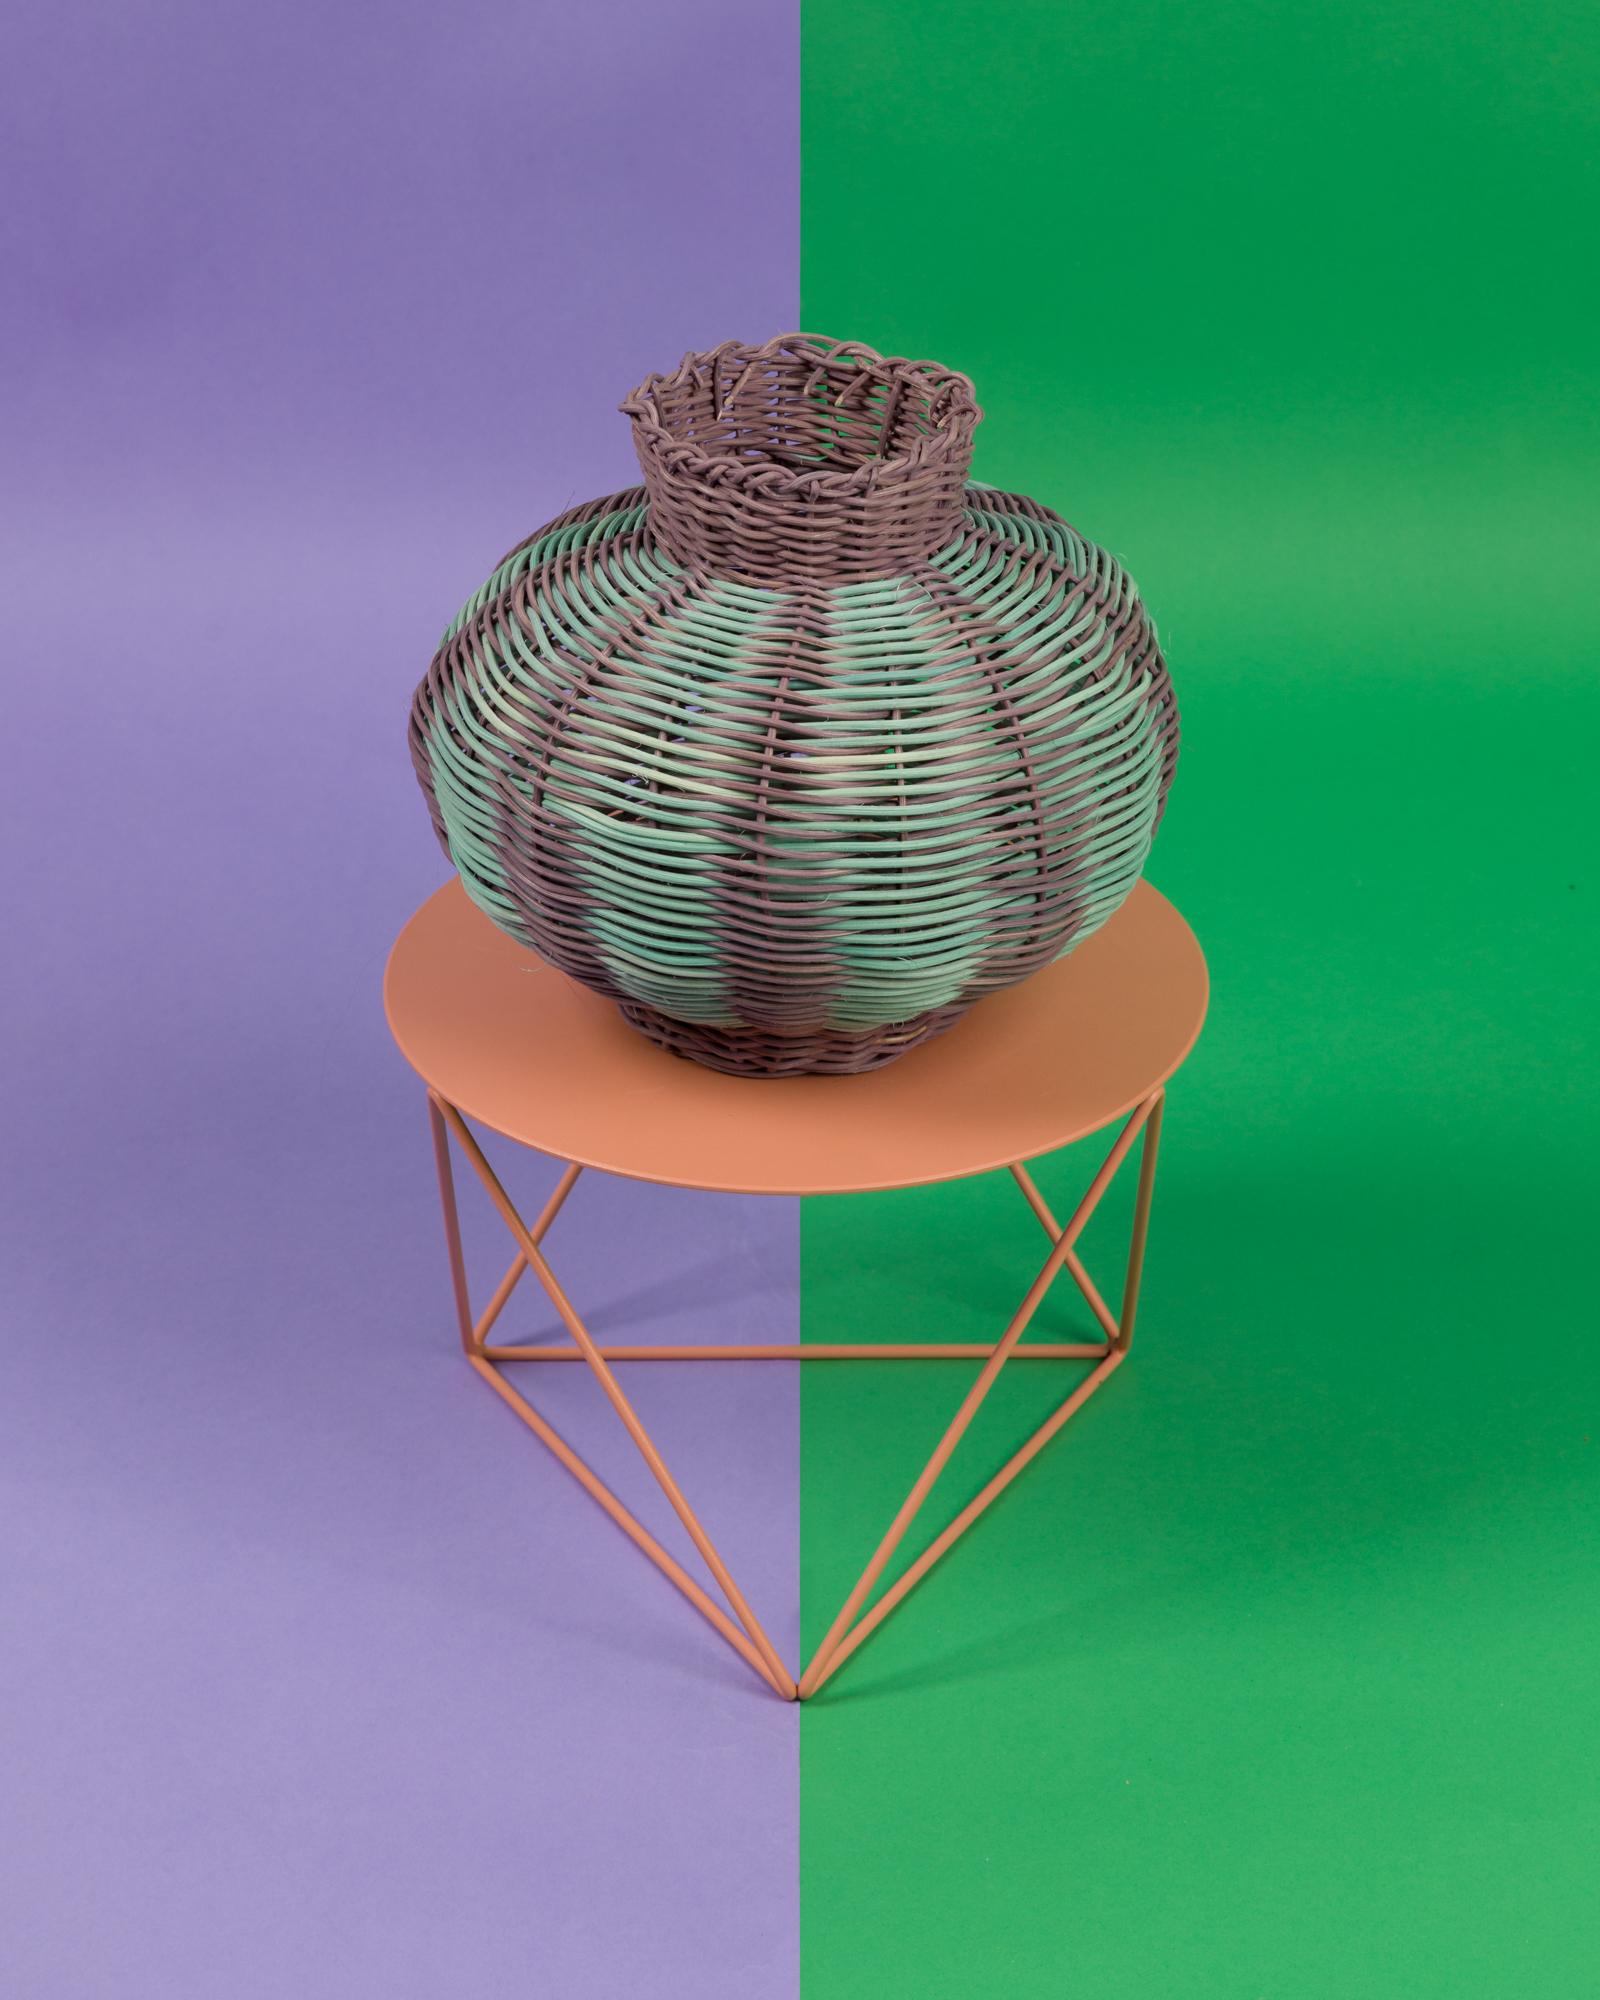 He lantern woven vessel is is a one-of-a-kind objet d’art, hand dyed and woven with reed in our Chicago studio. Inspired by forms in ancient Greek ceramics, the material language of this vessel brings together the rich craft history of weaving with